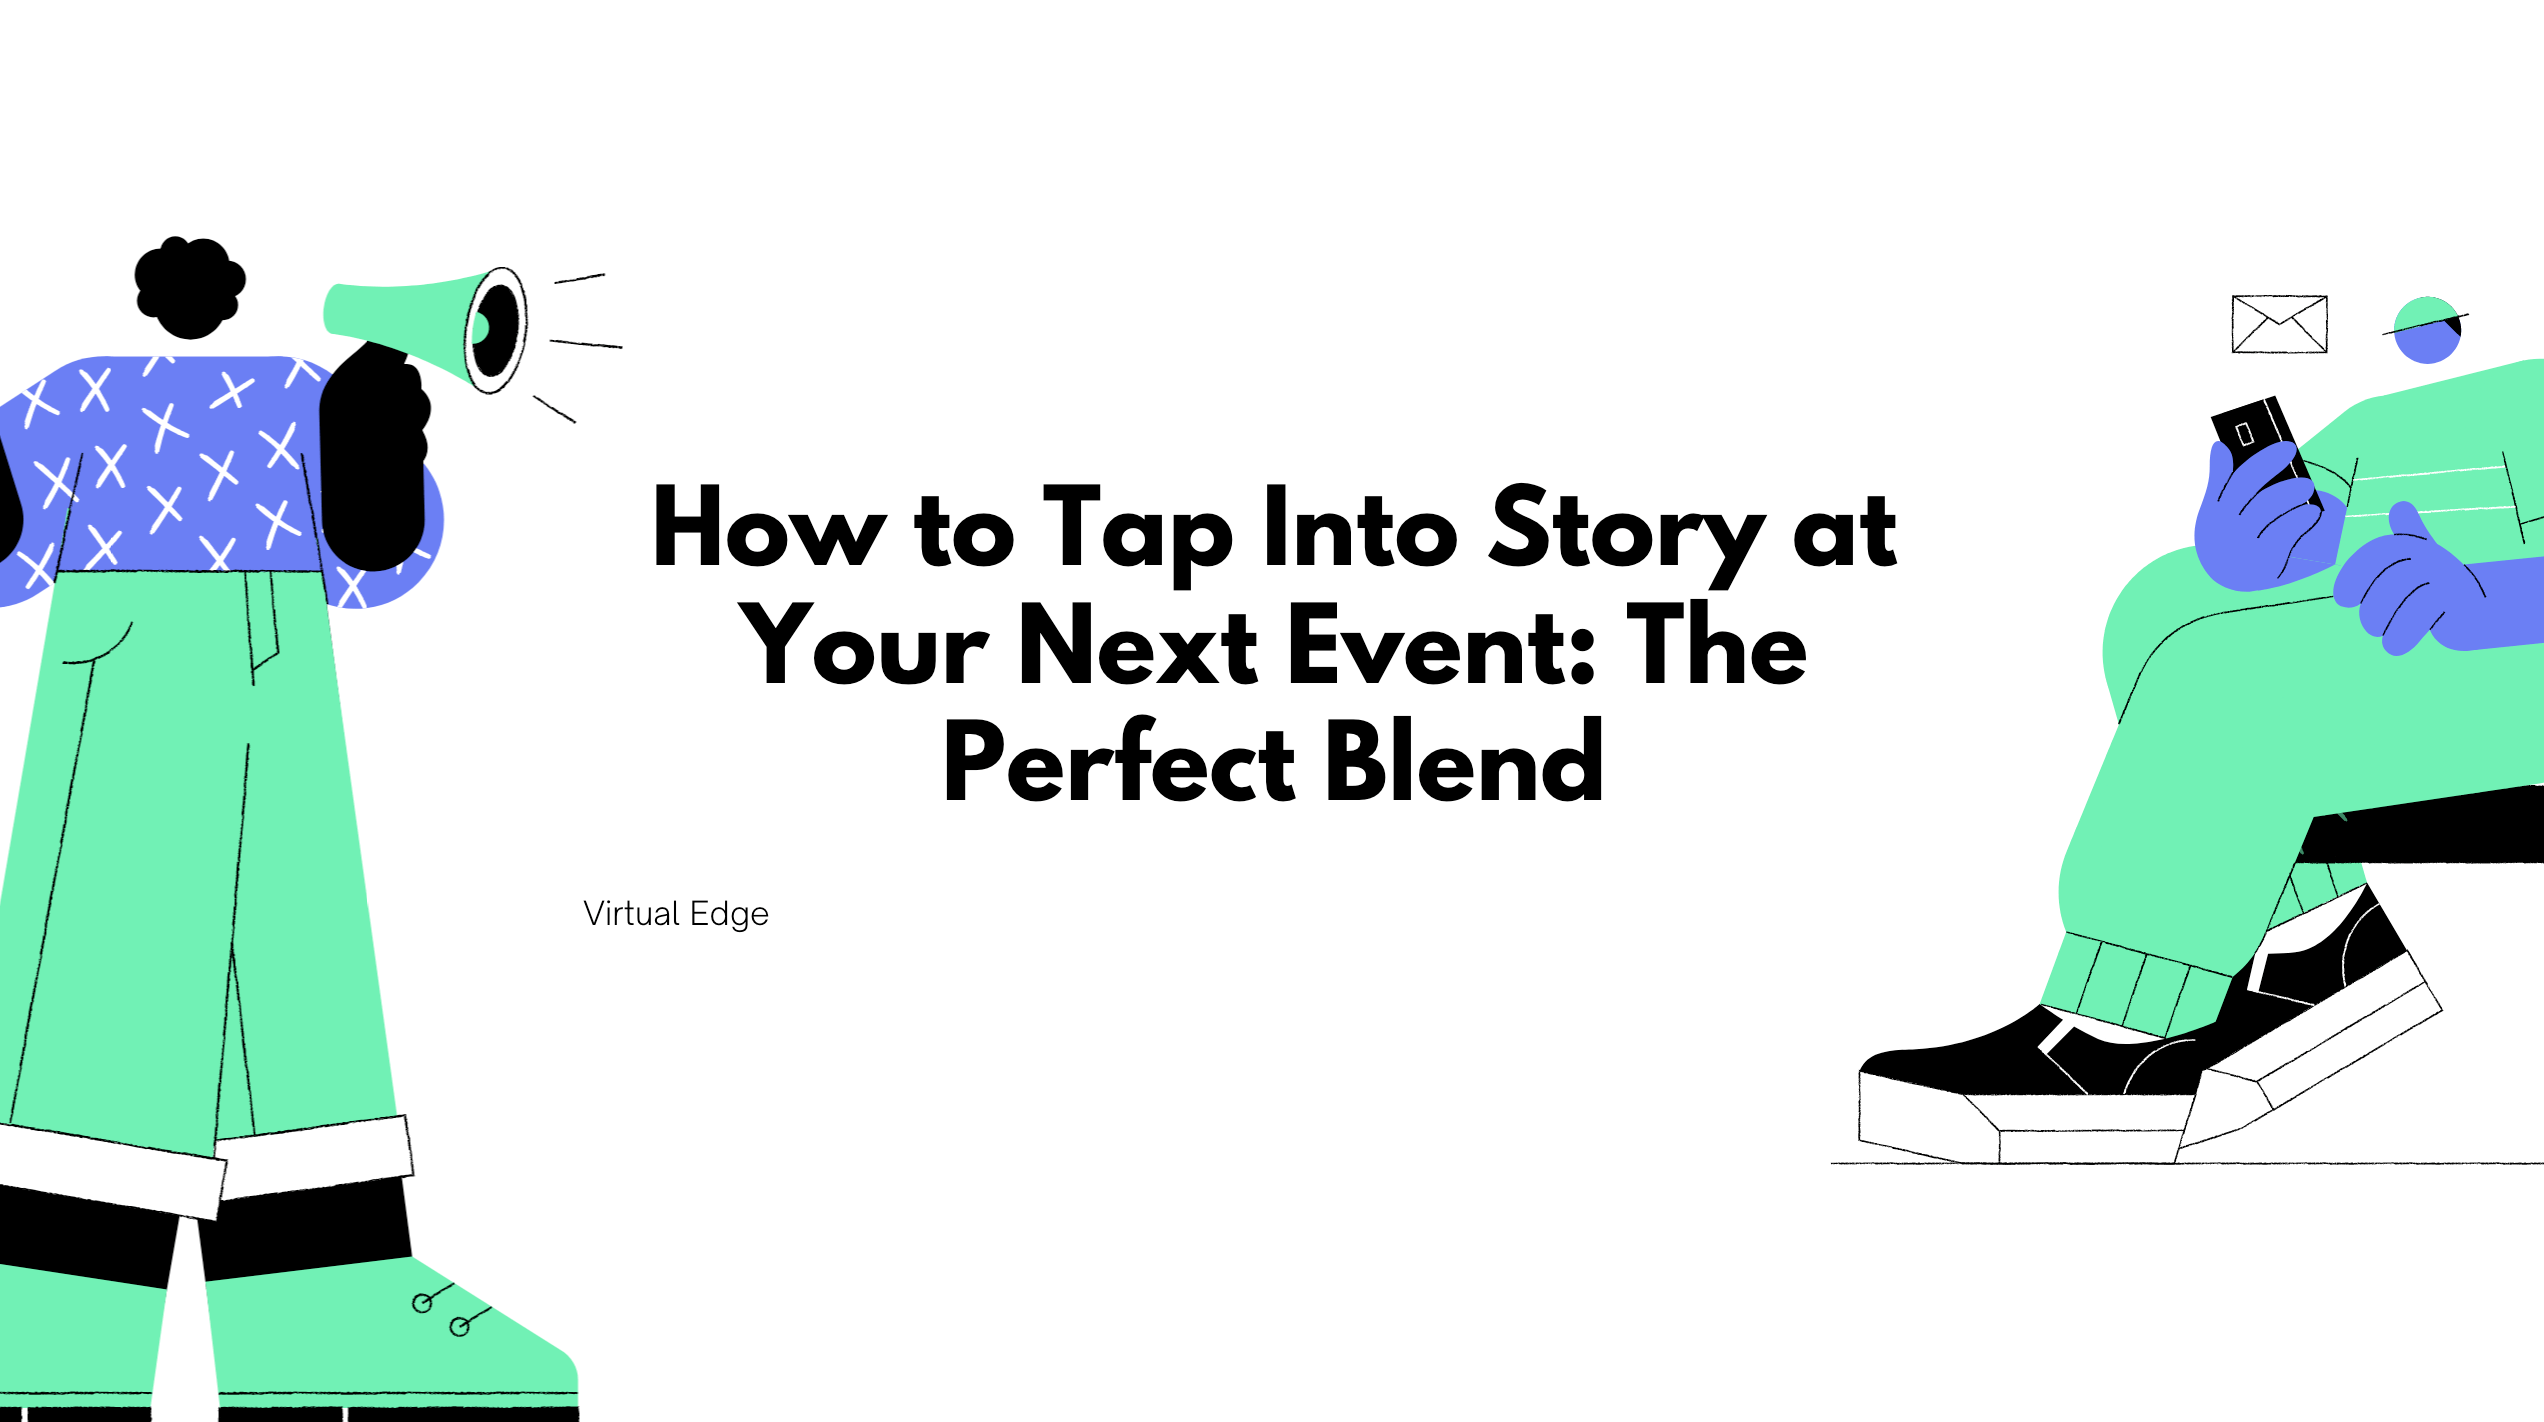 How to Tap Into Story at Your Next Event: The Perfect Blend